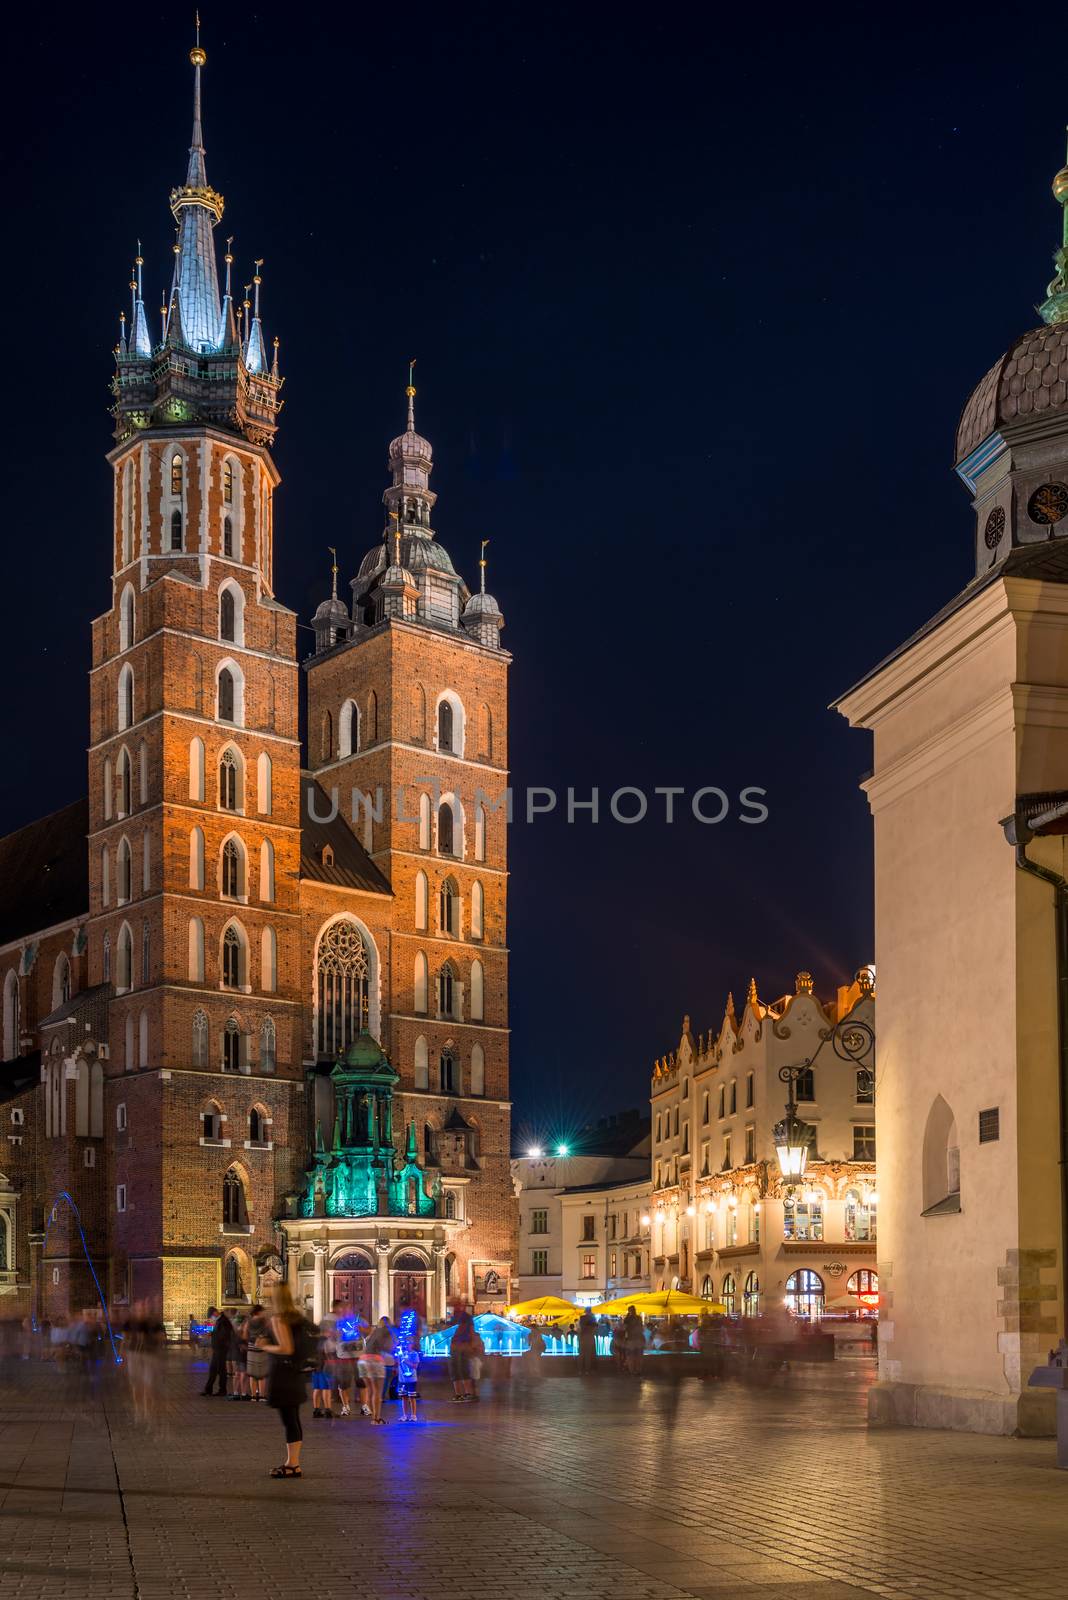 vertical night view of the Church of St. Mary in Krakow, Poland